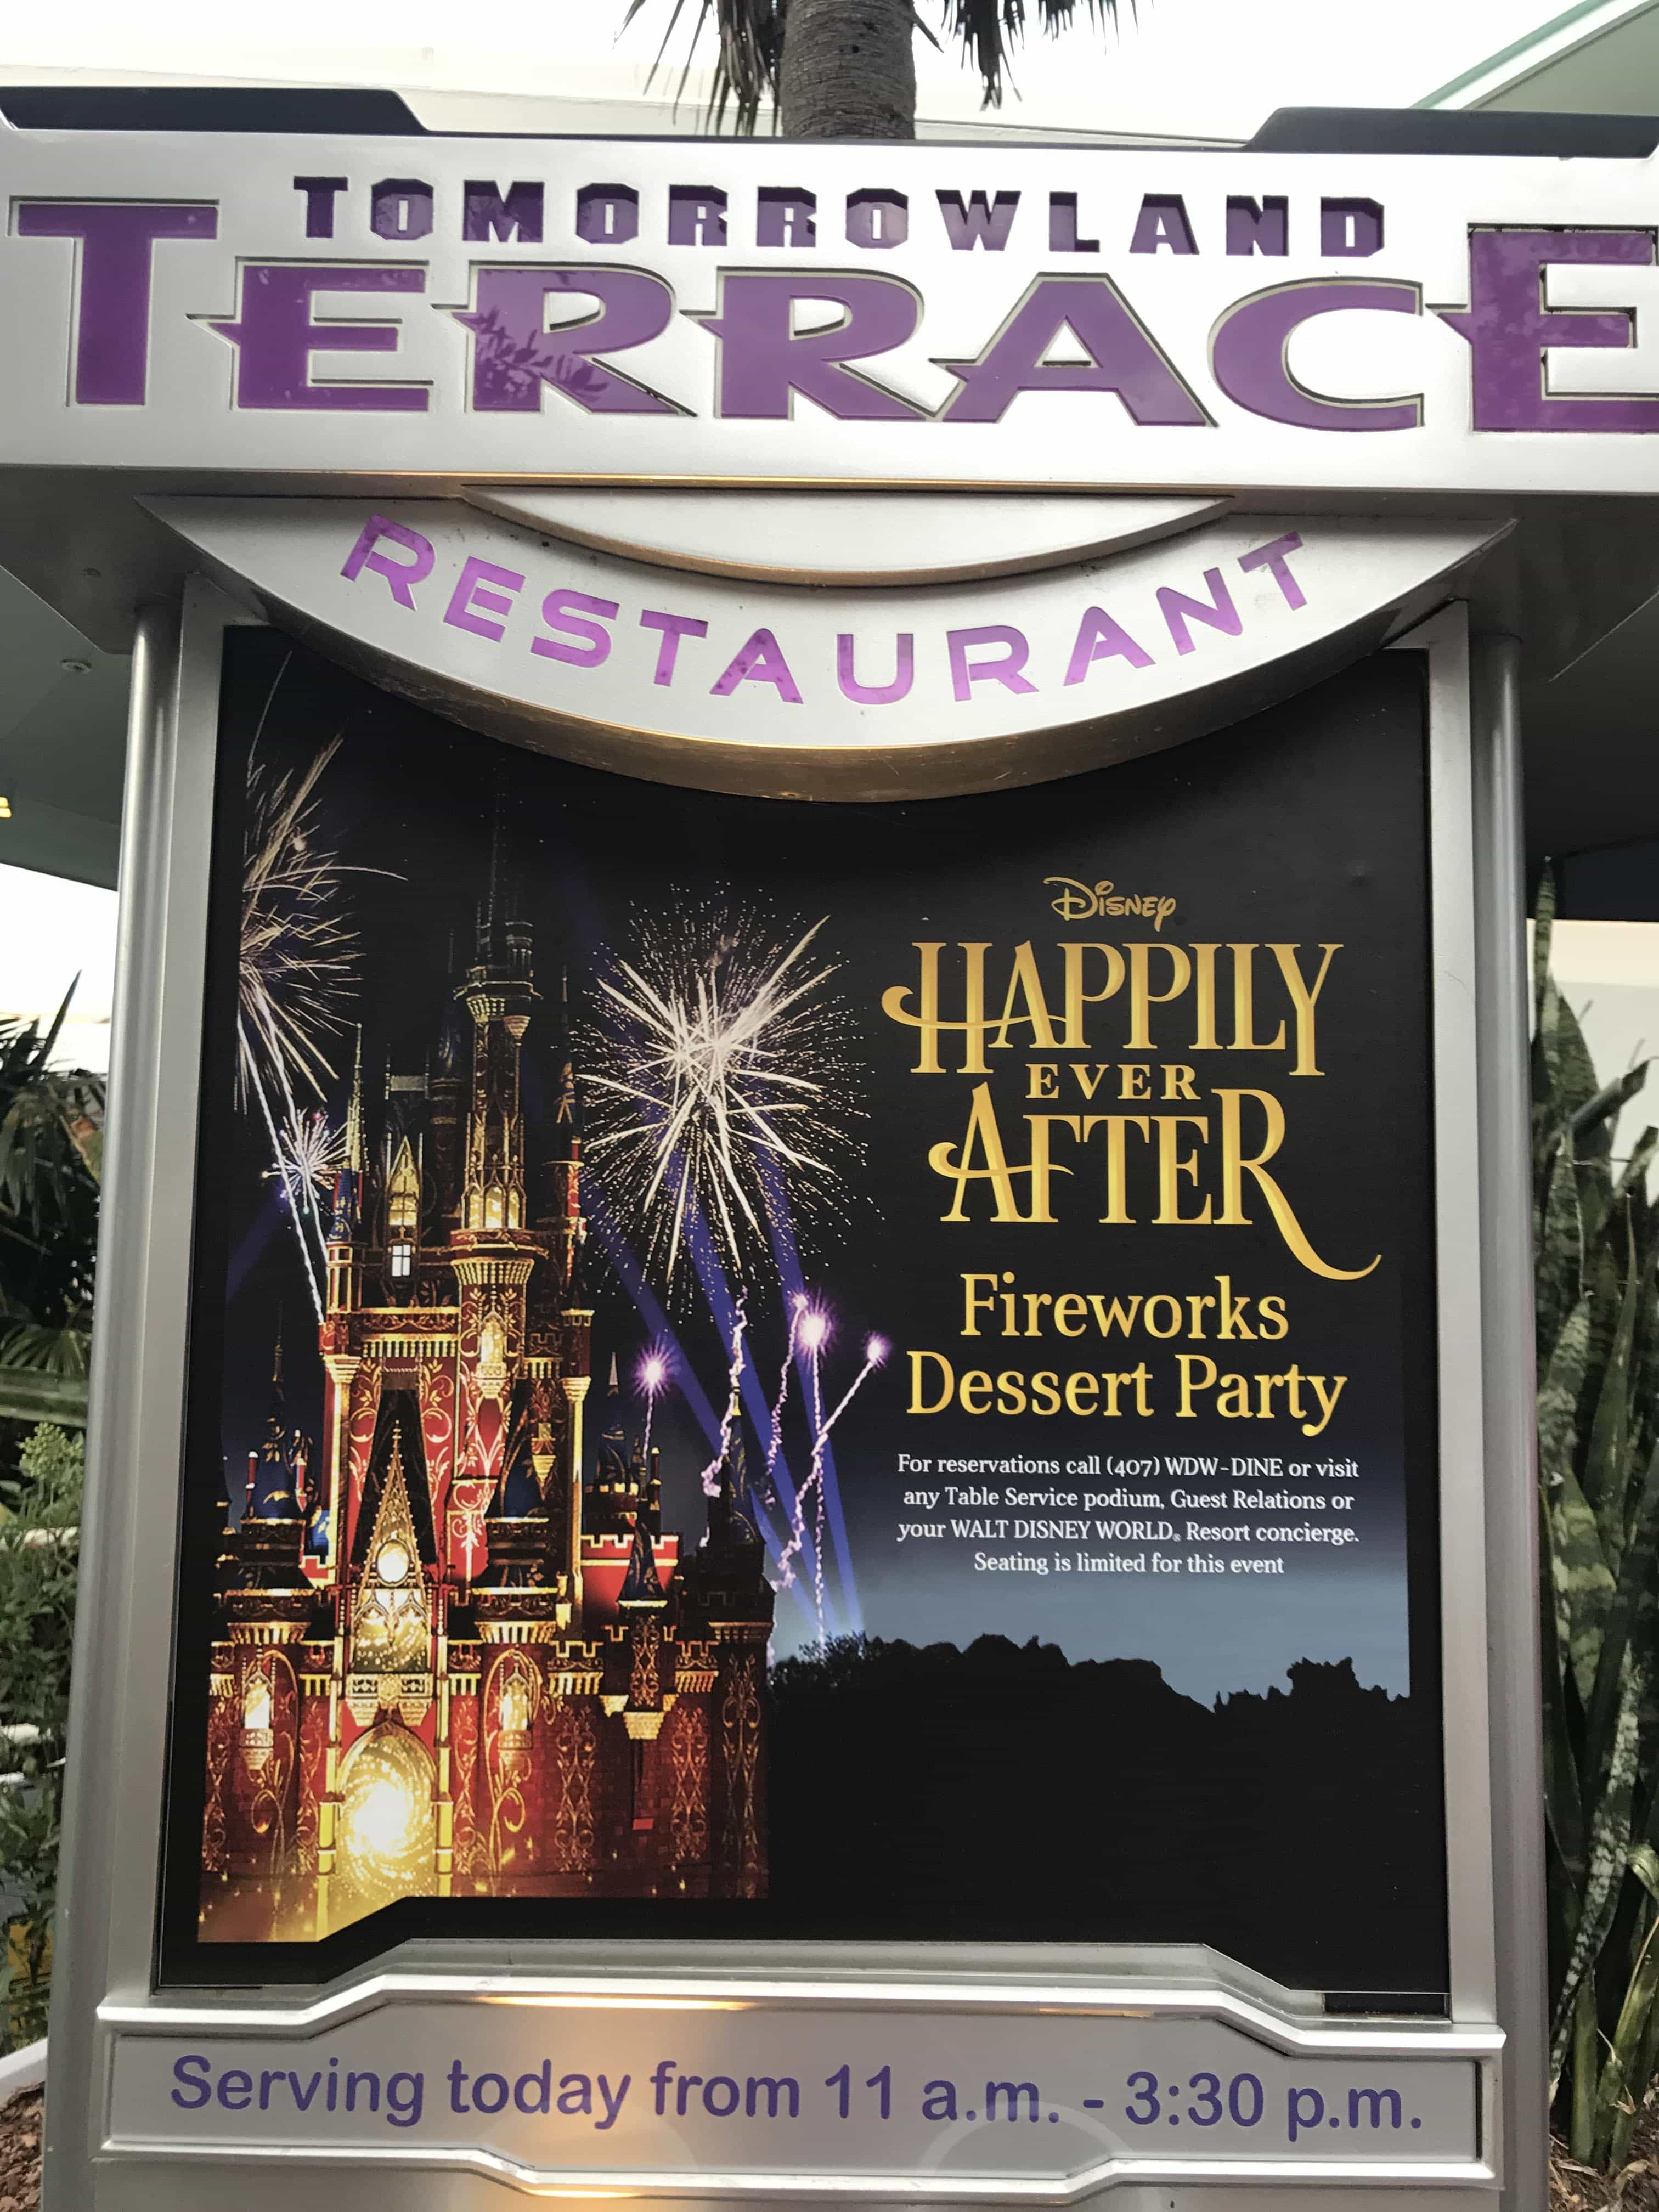 Fireworks Dessert Party With Plaza Garden Viewing
 Magical Monday Disney’s Happily Ever After Fireworks